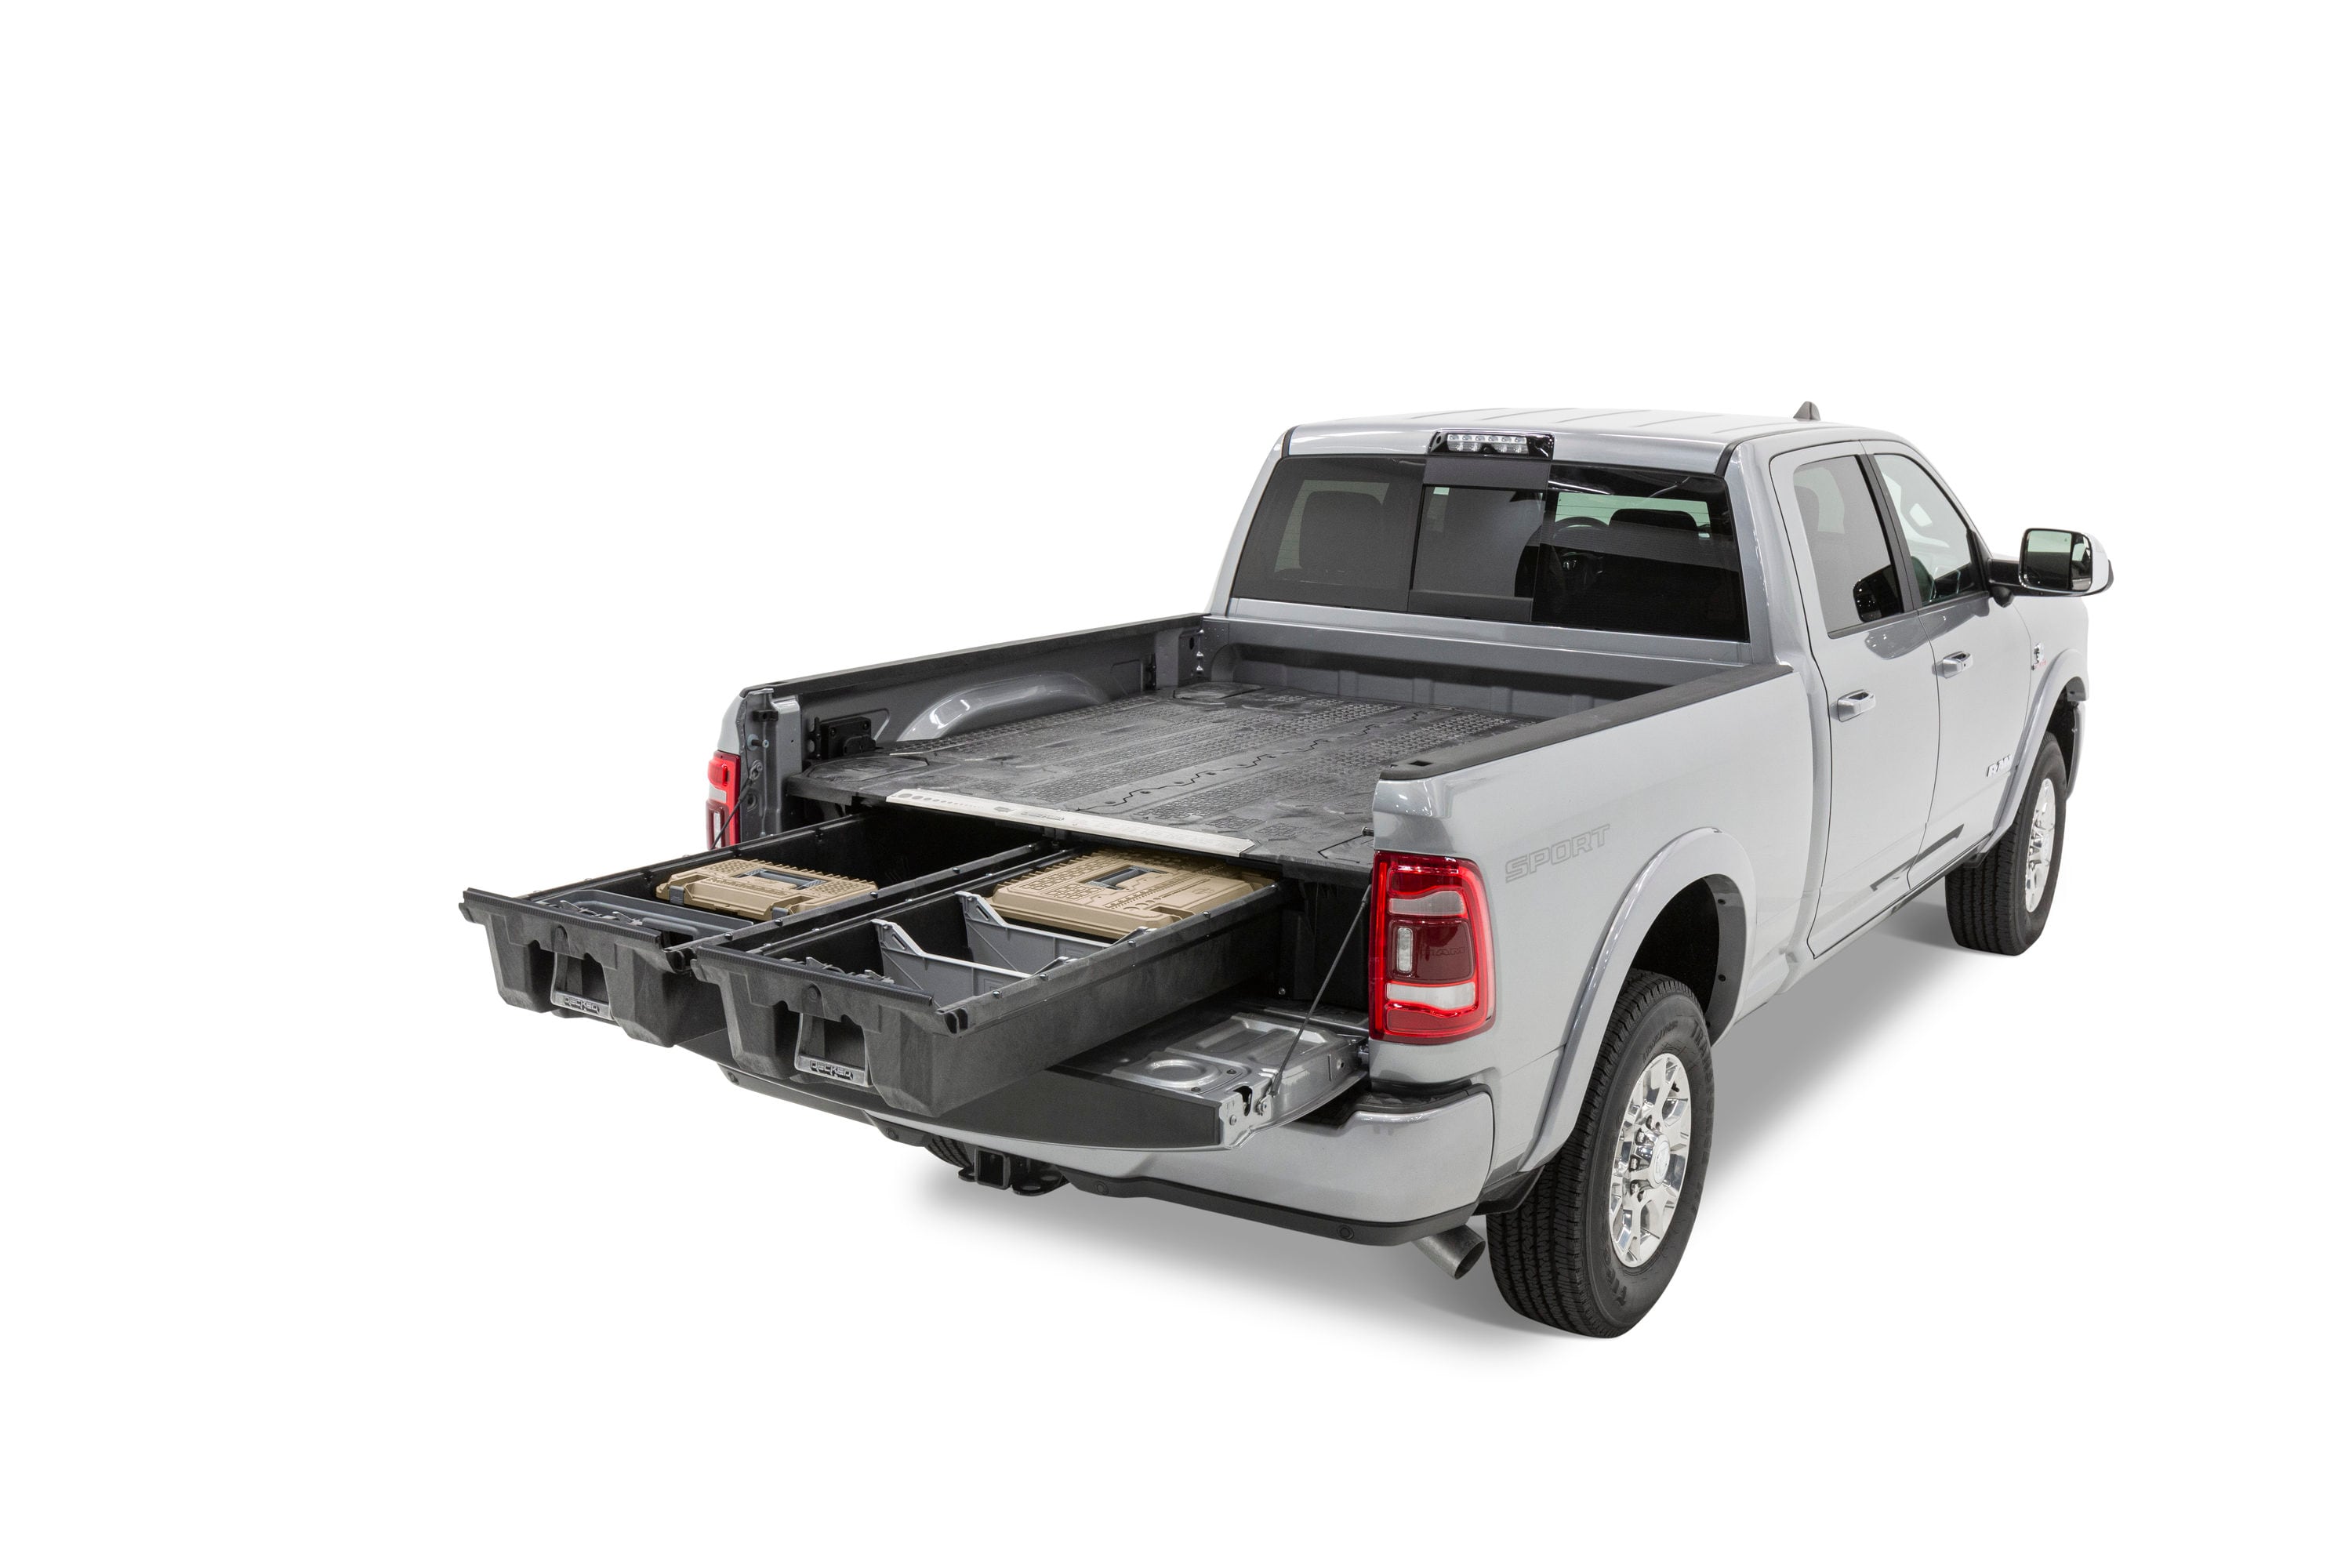 DECKED DECKED Storage System for RAM 1500 (2002-2008) 2500 and 3500 (2003-2009)- 6-ft 4-in Bed Length in Black | DR2